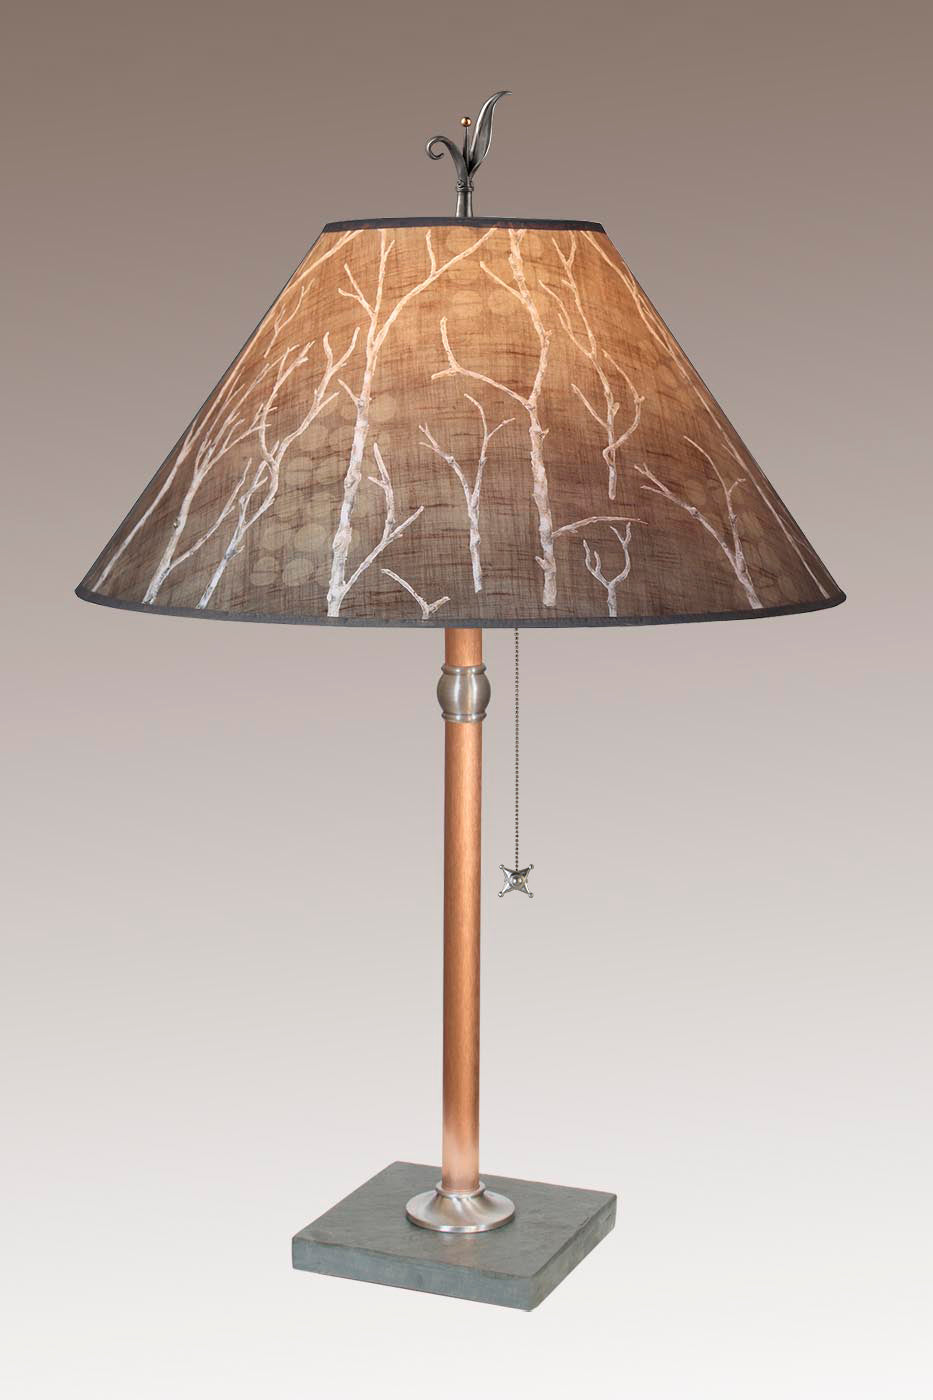 Janna Ugone &amp; Co Table Lamp Copper Table Lamp with Large Conical Shade in Twigs